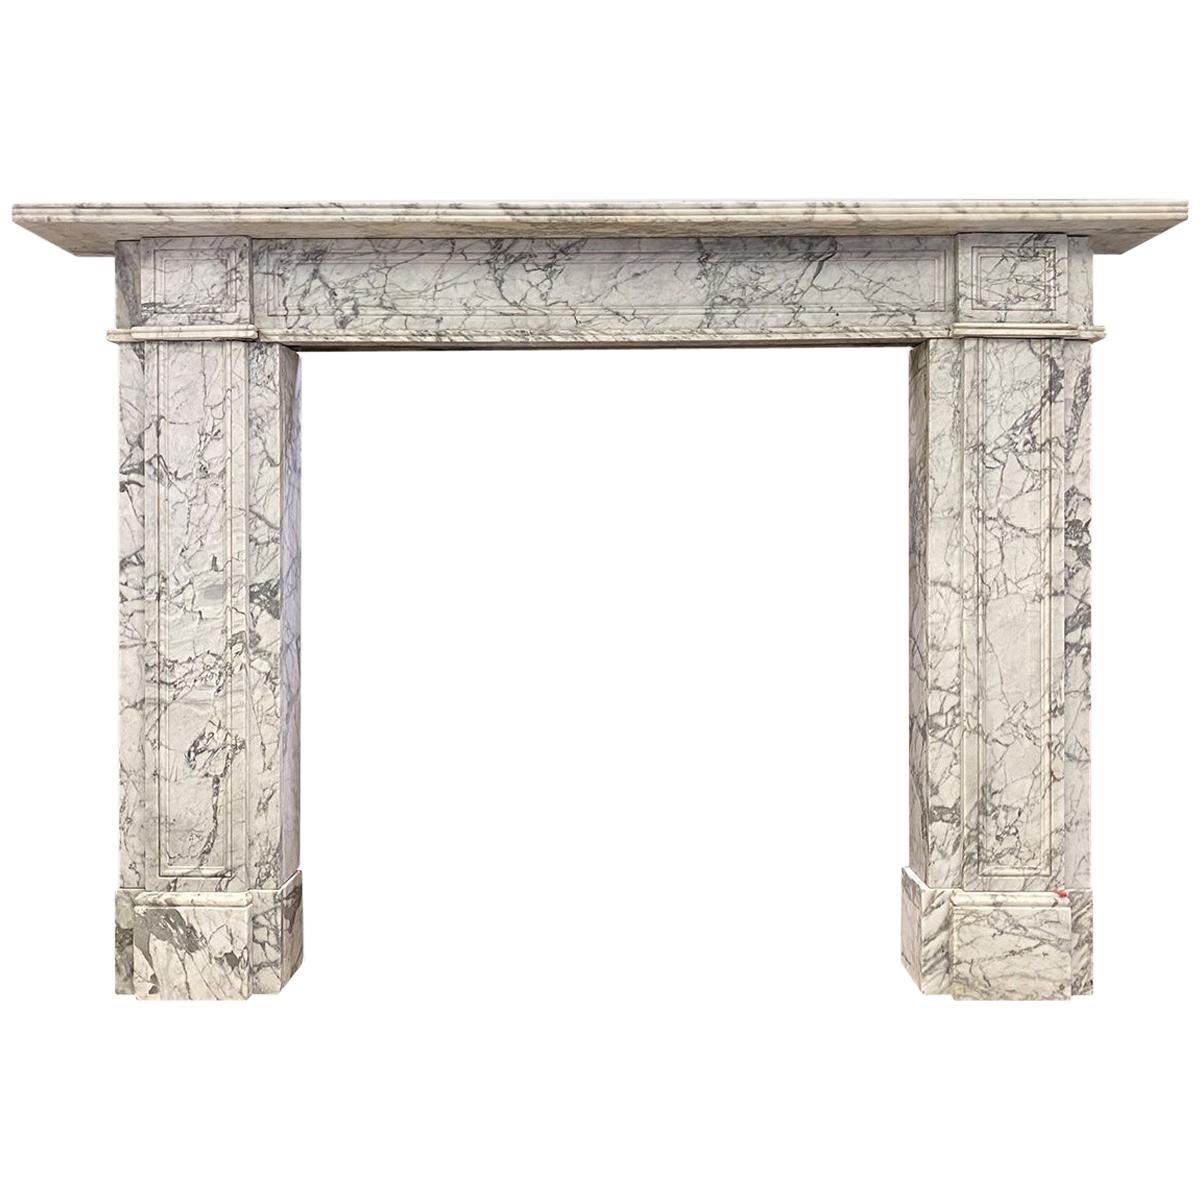 Antique English Early 19th Century Marble Fireplace Mantel